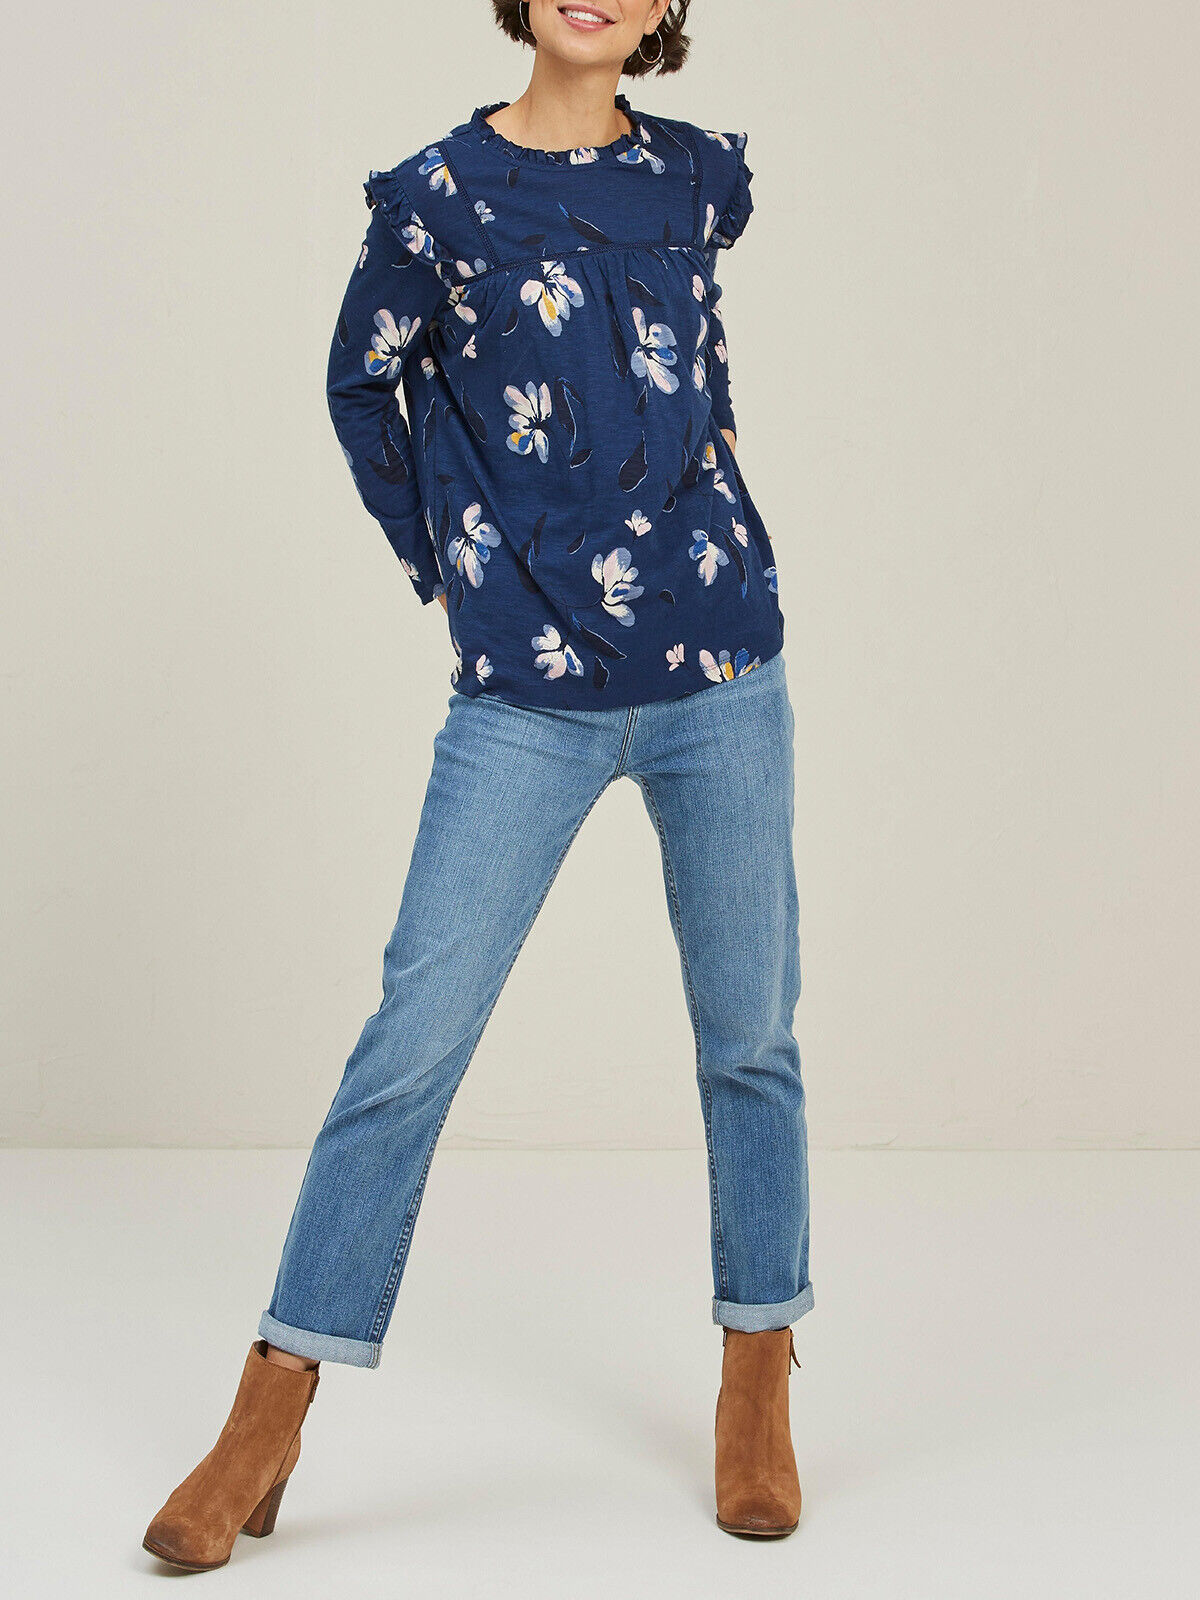 Fat Face Indigo Beatrice Water Floral 3/4 Sleeve Top 10 12 14 16 18 RRP £32.50